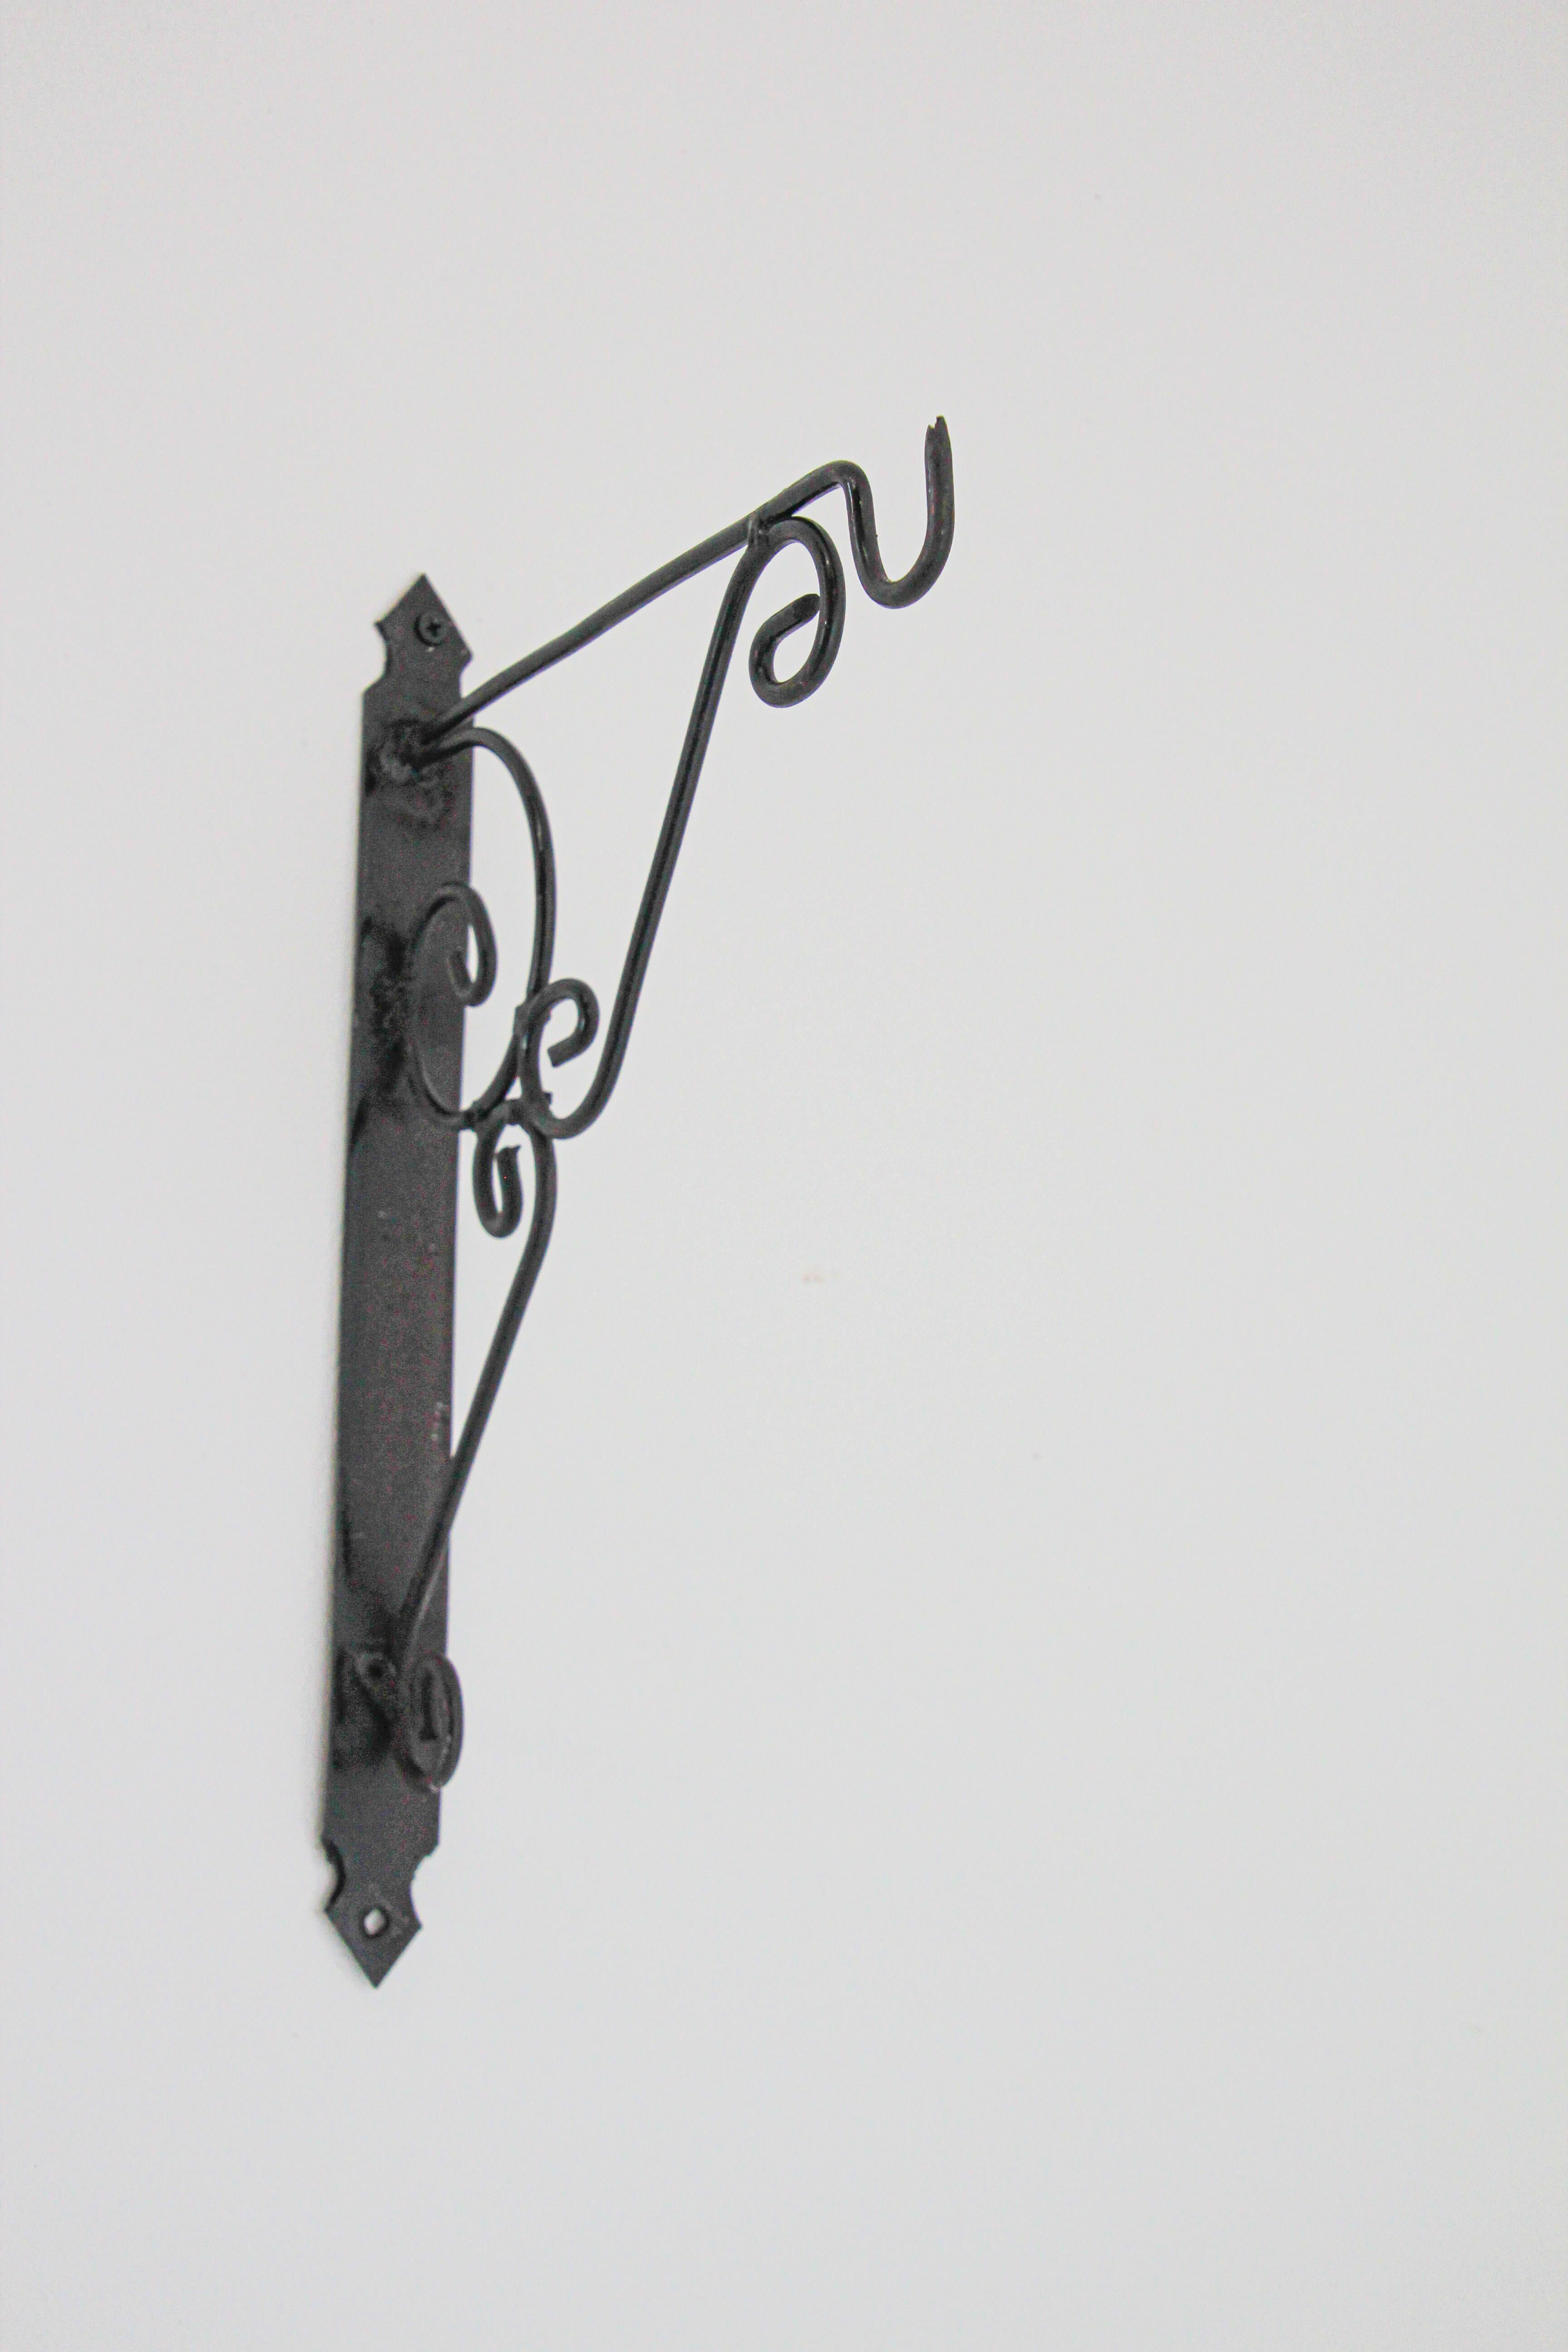 Moorish Wall Mounted Iron Bracket for Lanterns or Signs For Sale